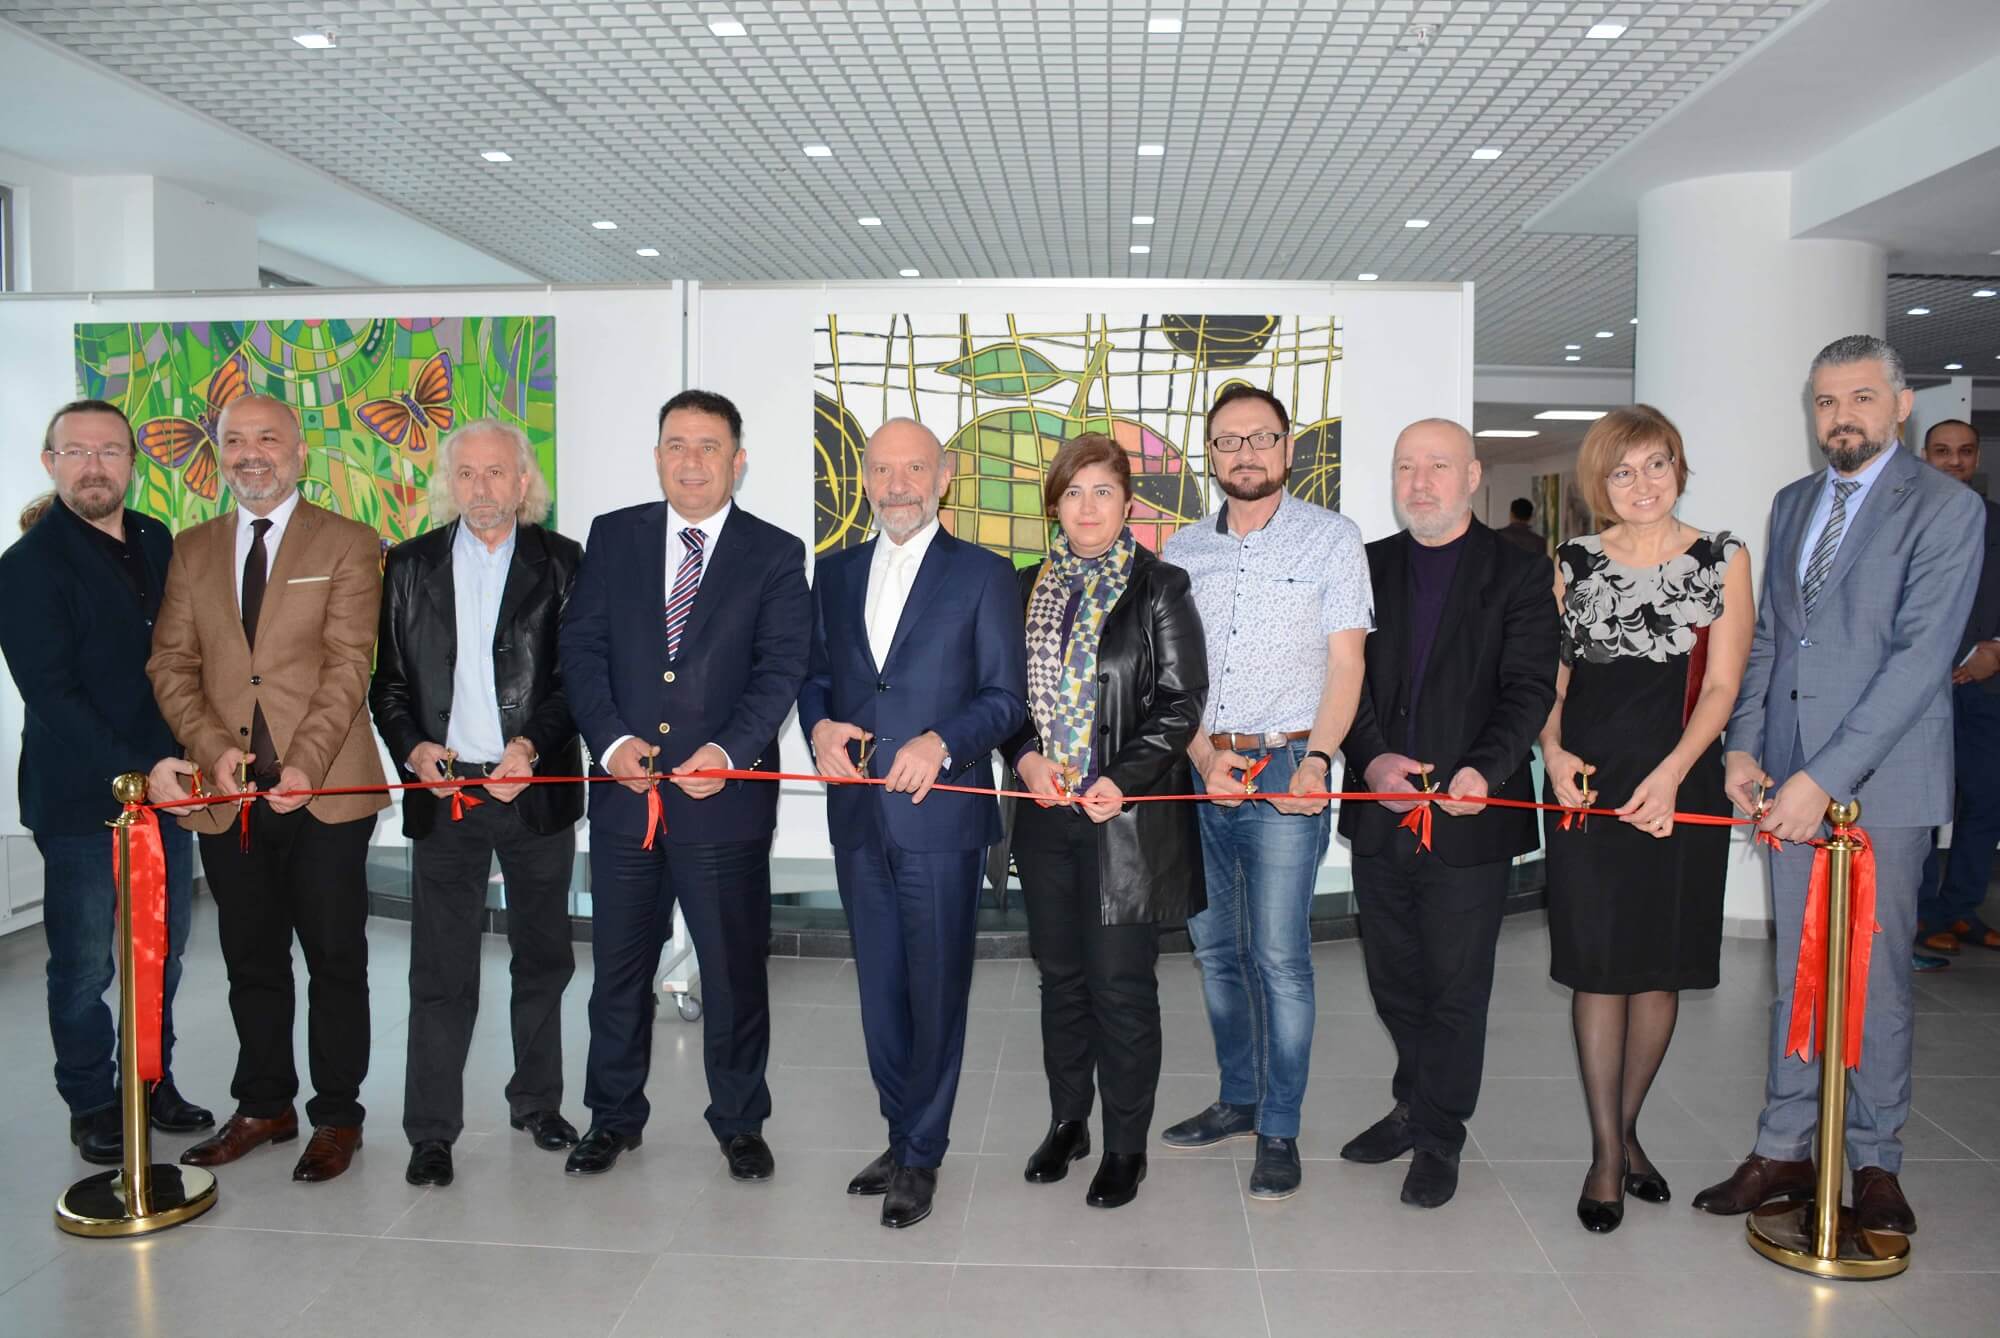 Three Separate Group Exhibitions consisting of 55 Artworks exclusively made for Cyprus Museum of Modern Arts by Uzbekistan Artists, Gagauzian Artists and Kazakhstan Artists opened by Famagusta Deputy H. Ersan Saner